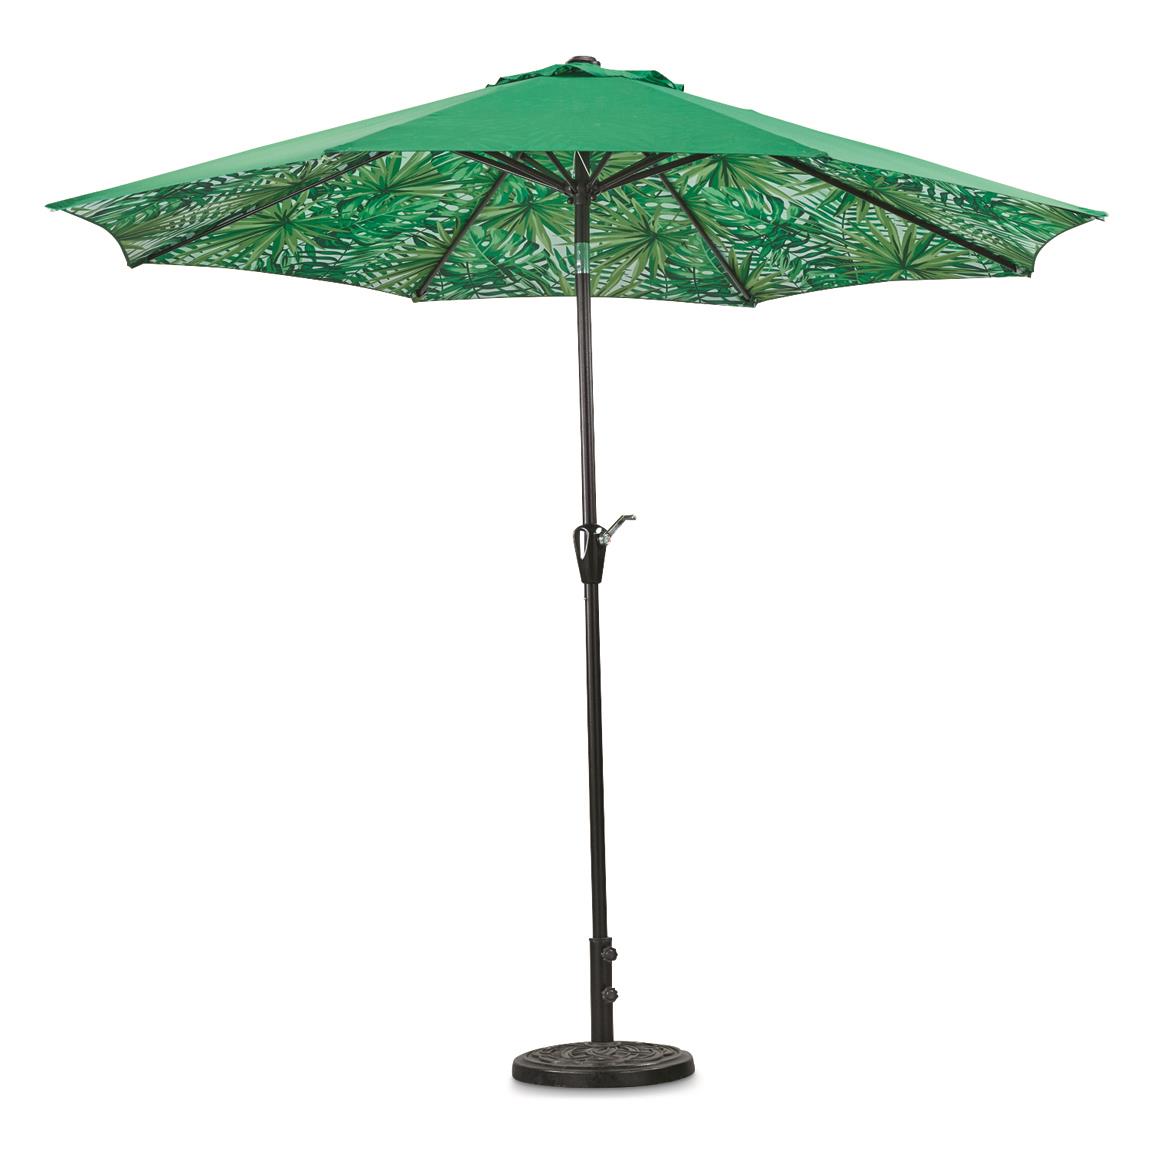 9 Foot Patio Umbrella with Palm Tree Pattern Canopy